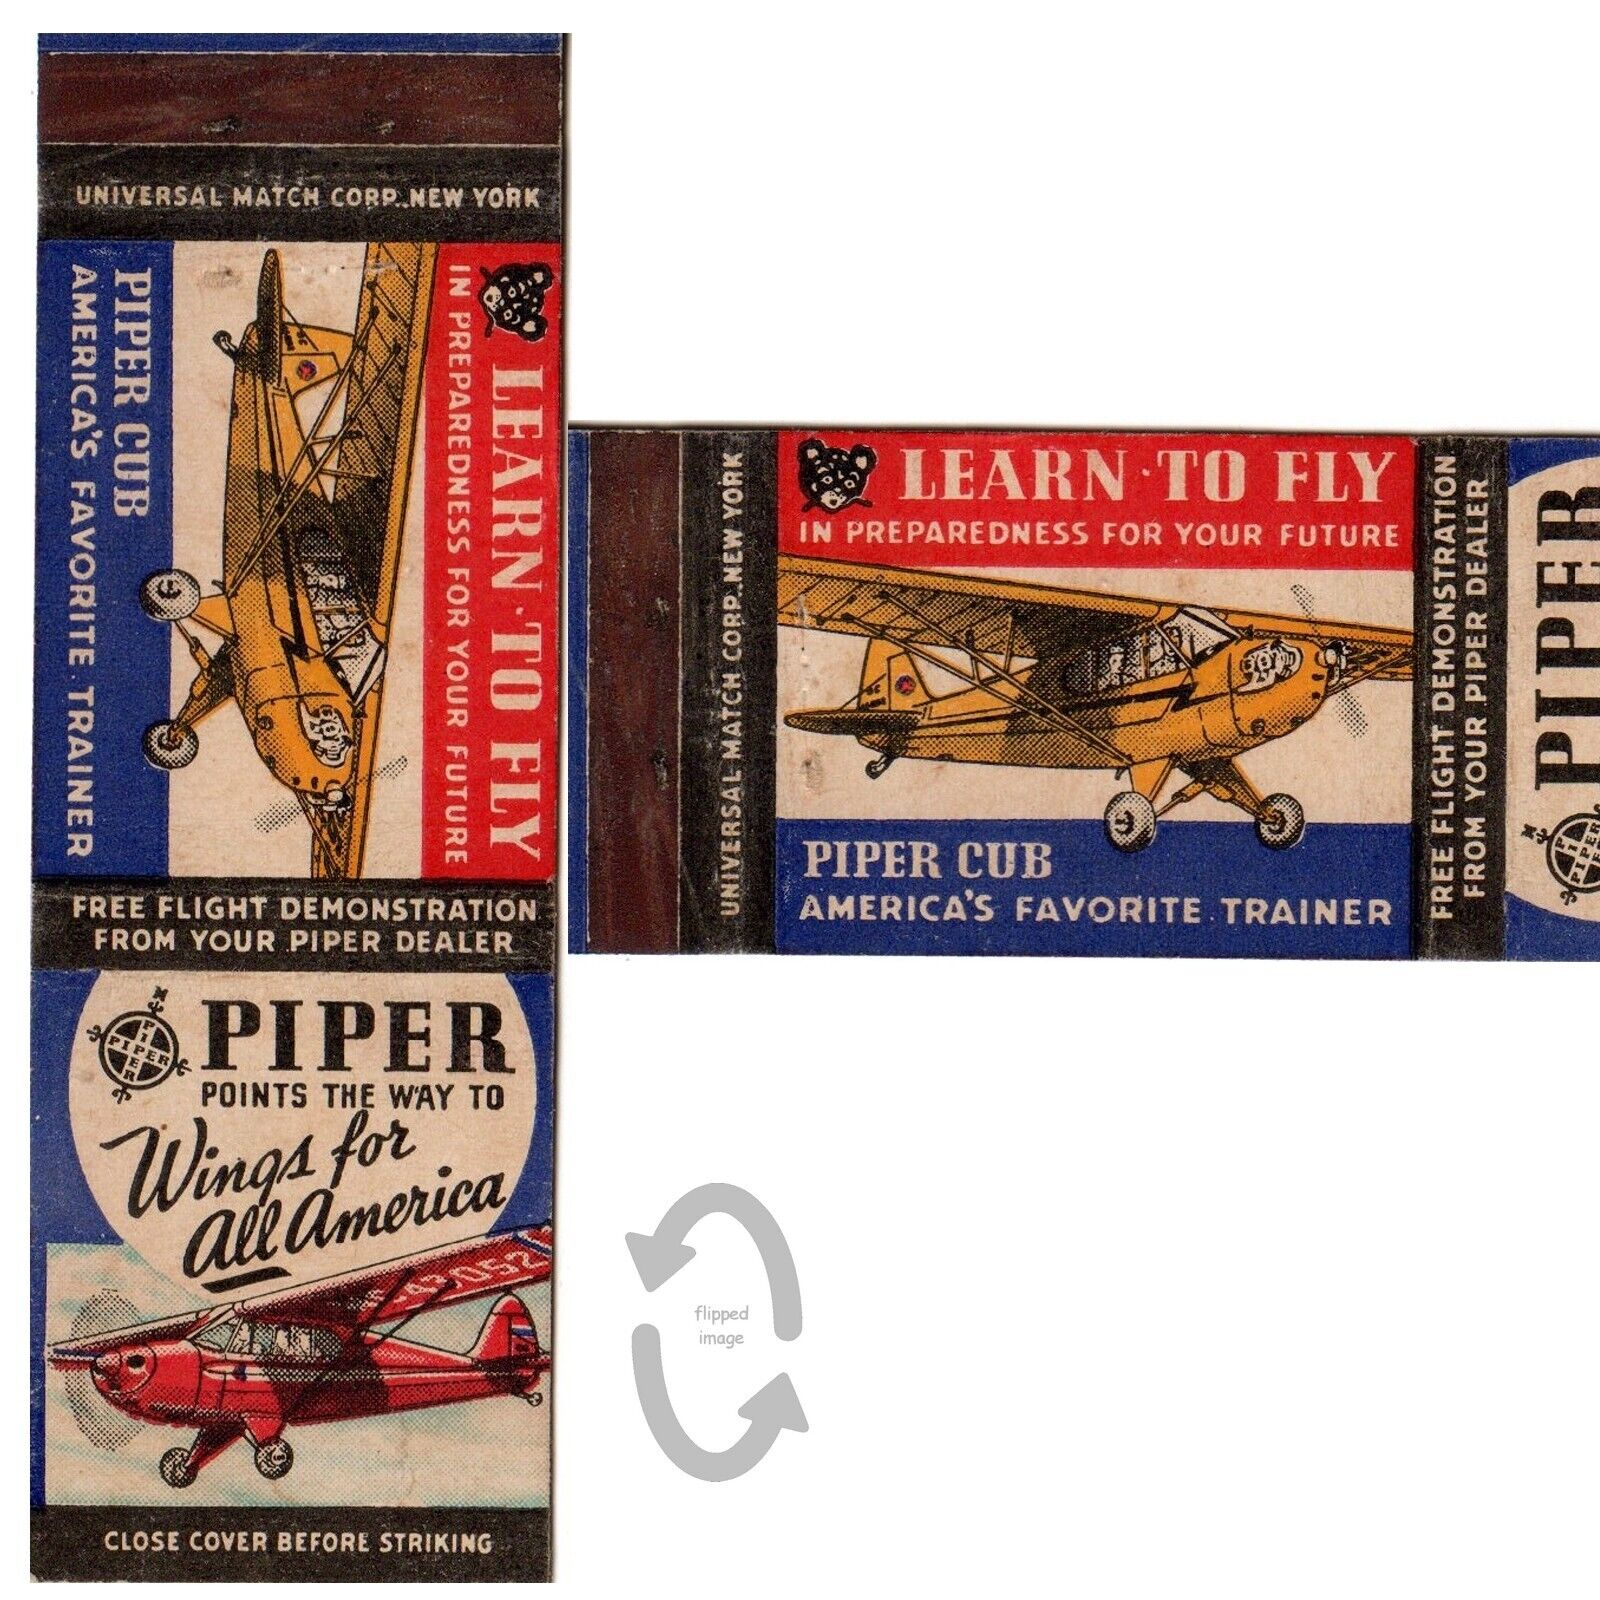 Vintage Matchbook Cover Piper Cub learn to fly coupon 1940s mail offer airplane